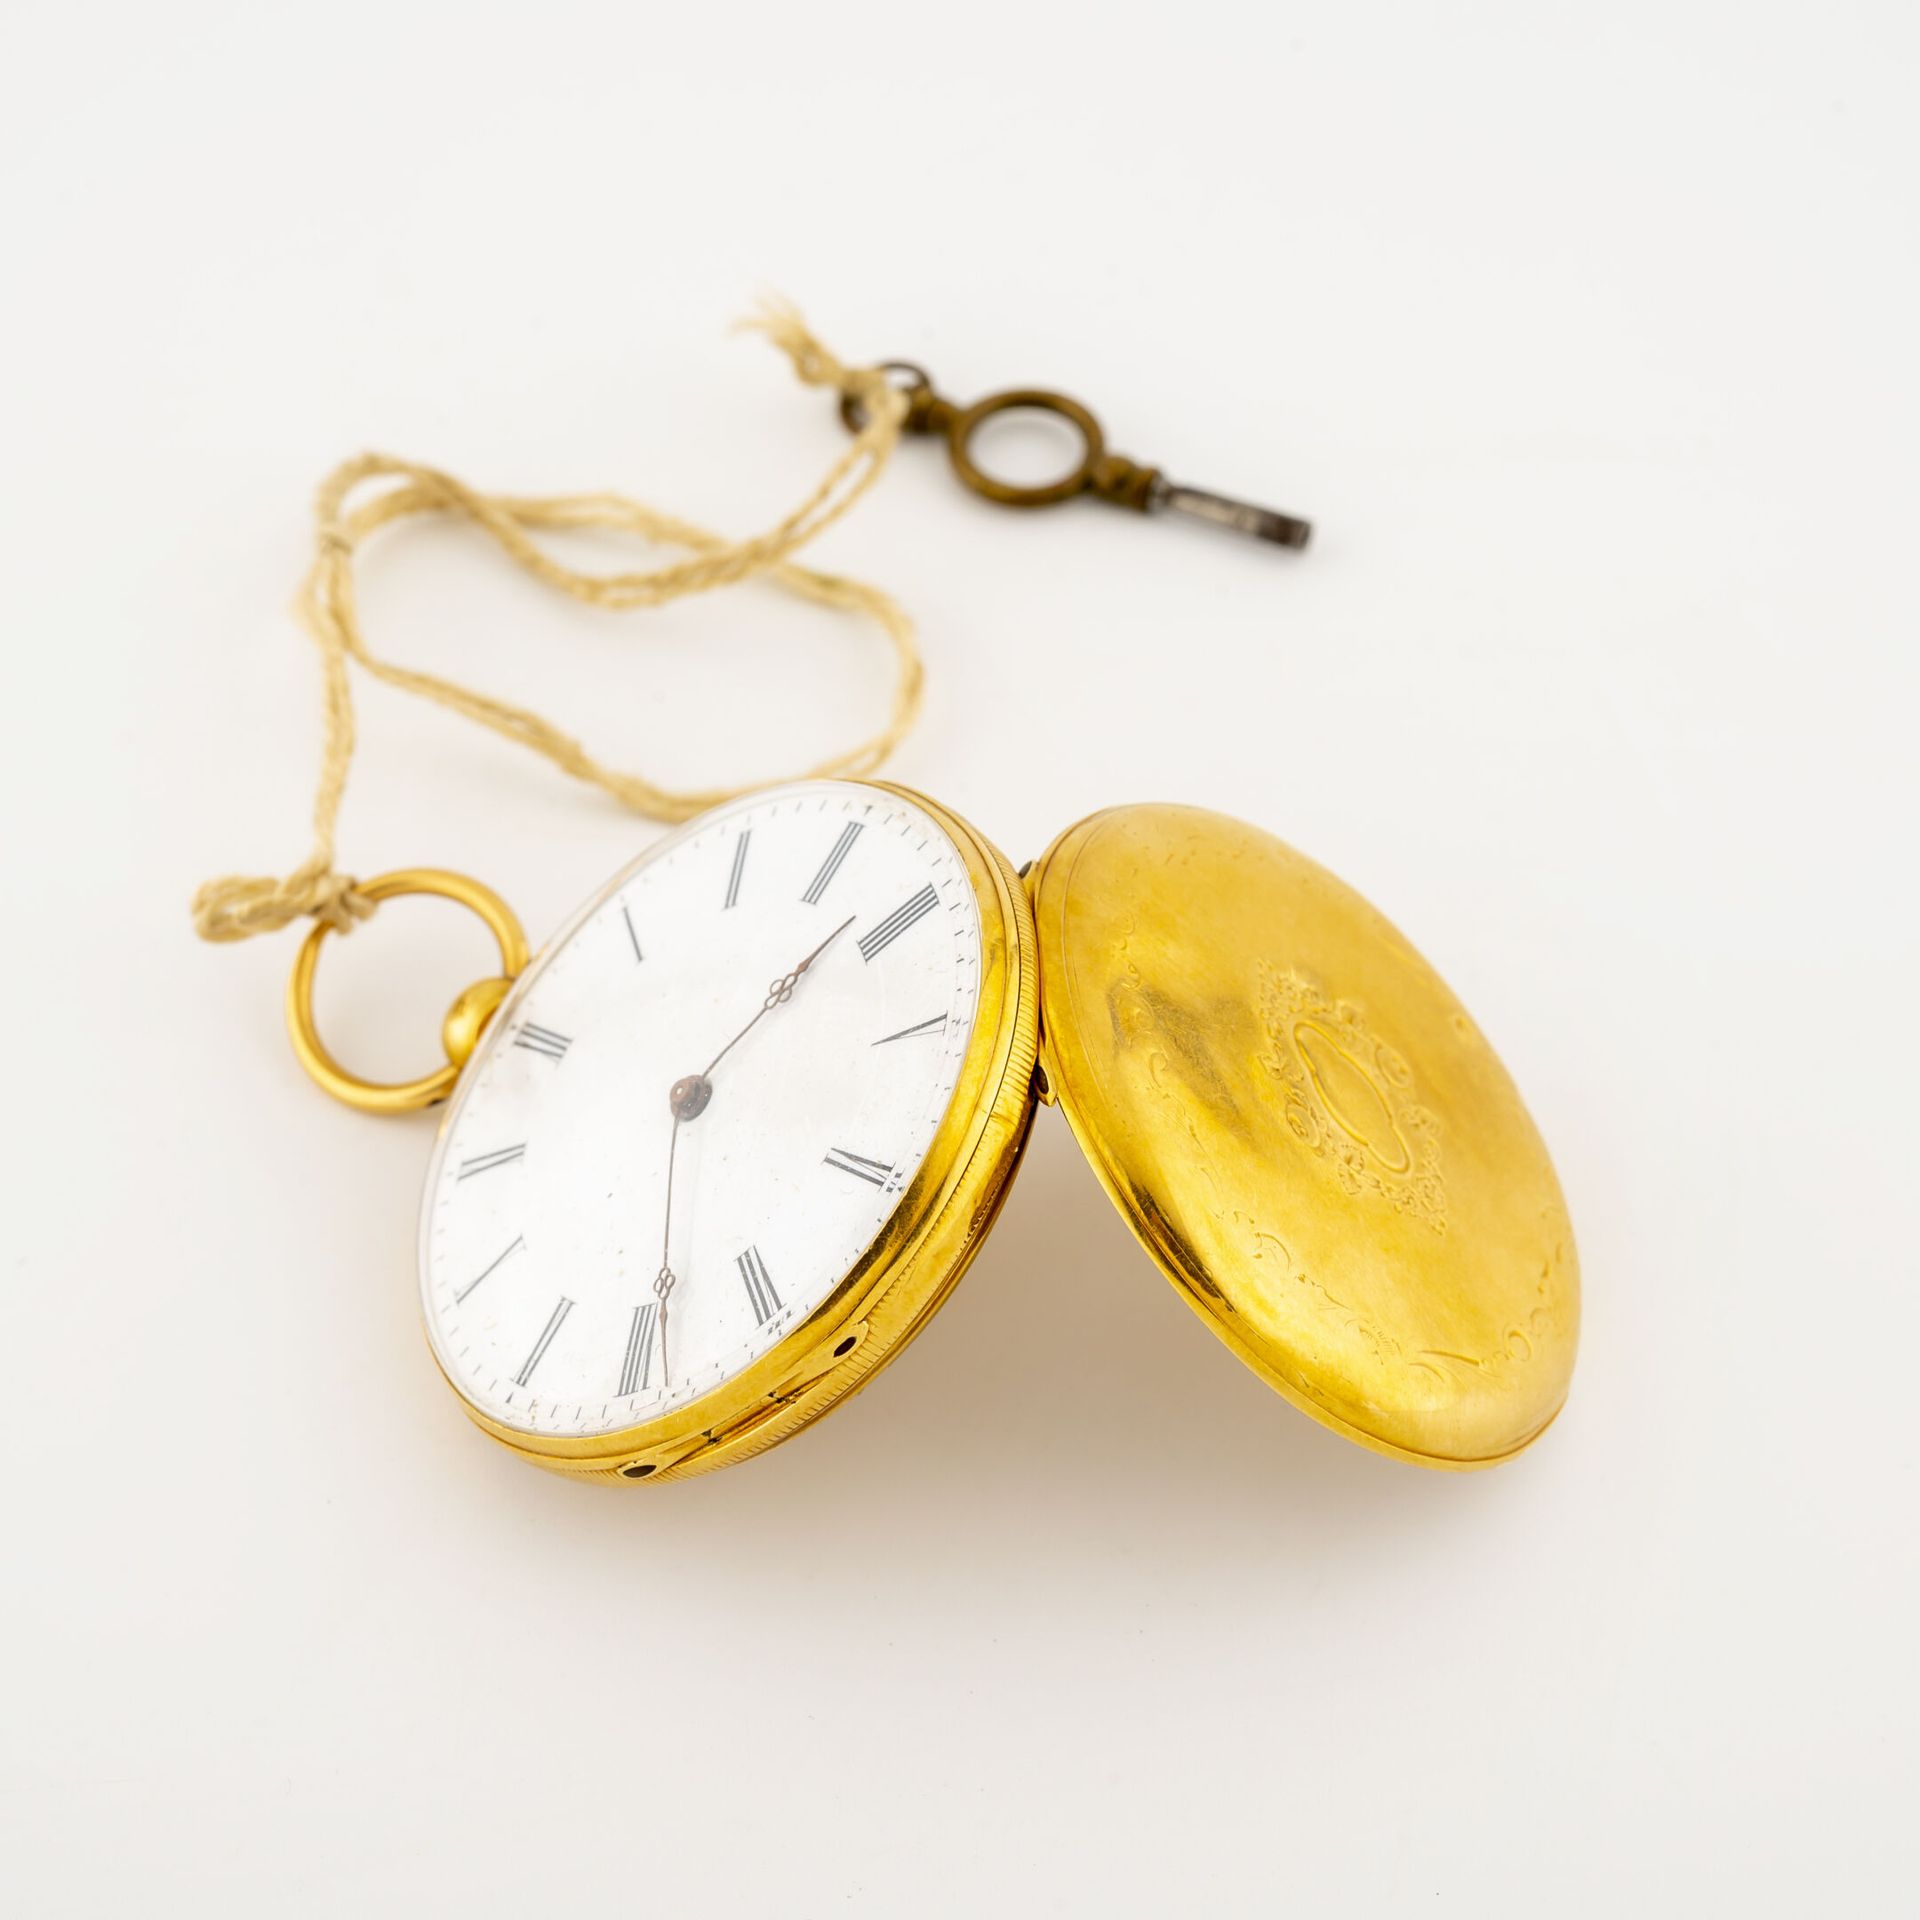 Null Yellow gold (750) pocket watch.

Back cover with unnumbered four-lobed cart&hellip;